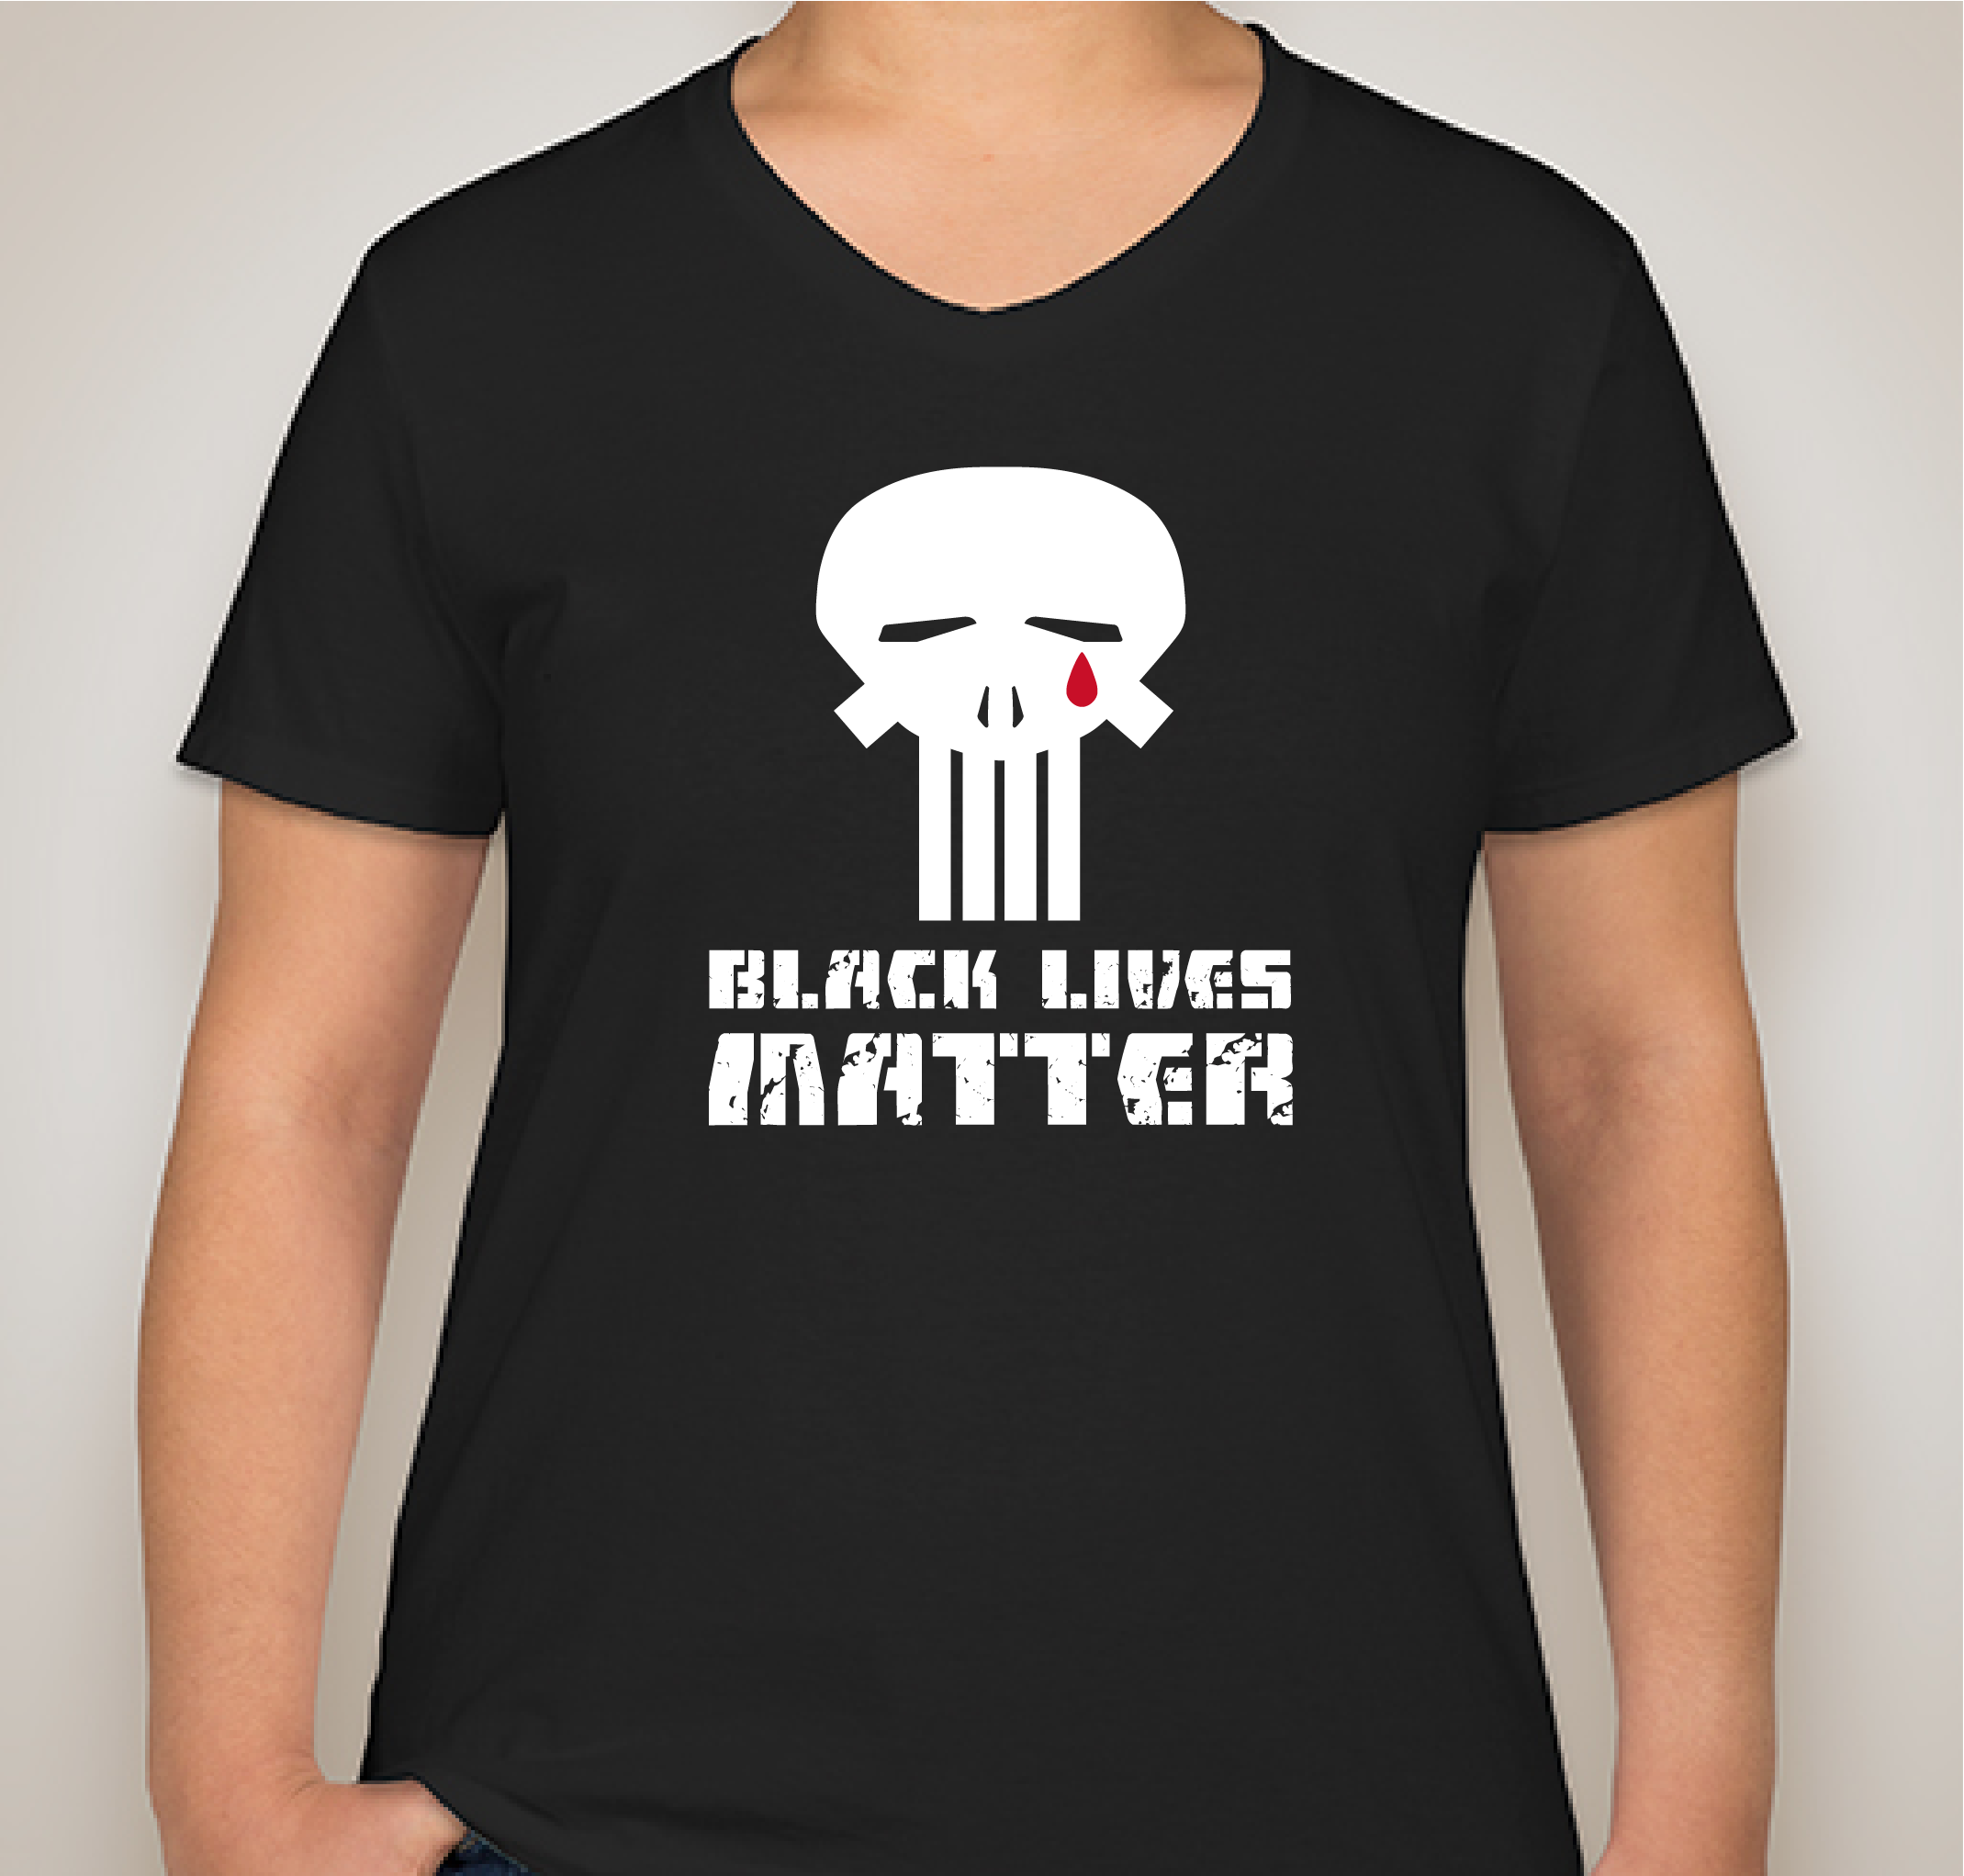 Black Lives Matter - Skulls For Justice #18 - Presented by Gerry Conway Fundraiser - unisex shirt design - front